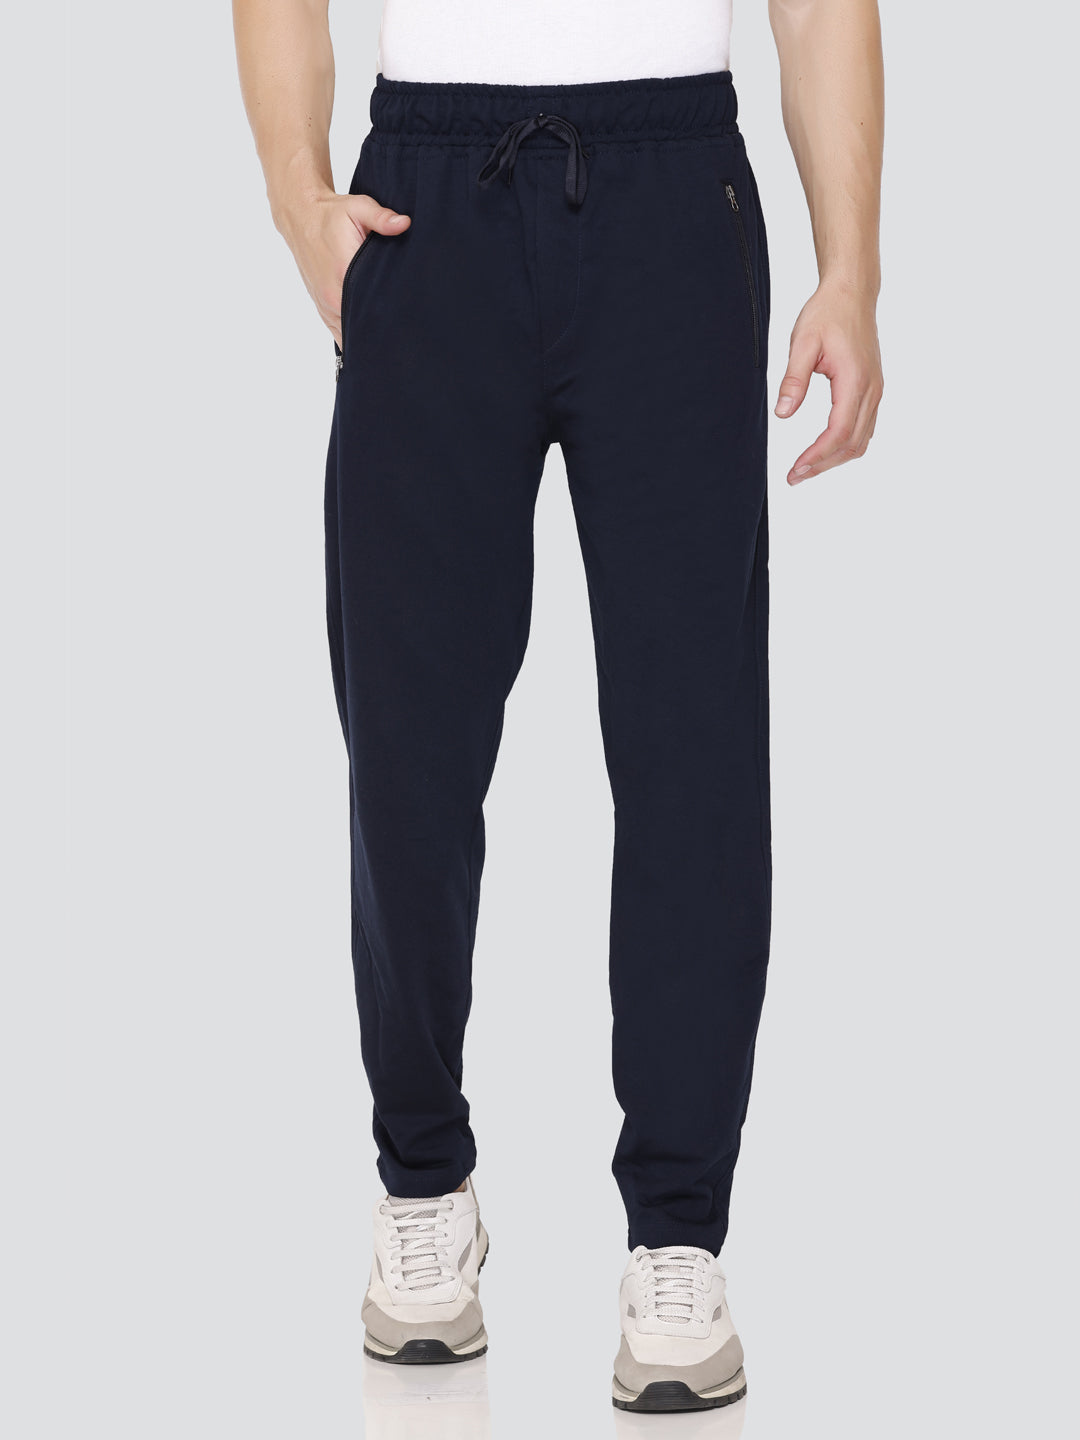 Track Pants vs. Sweatpants: Which is Best for Men? – kaladhara